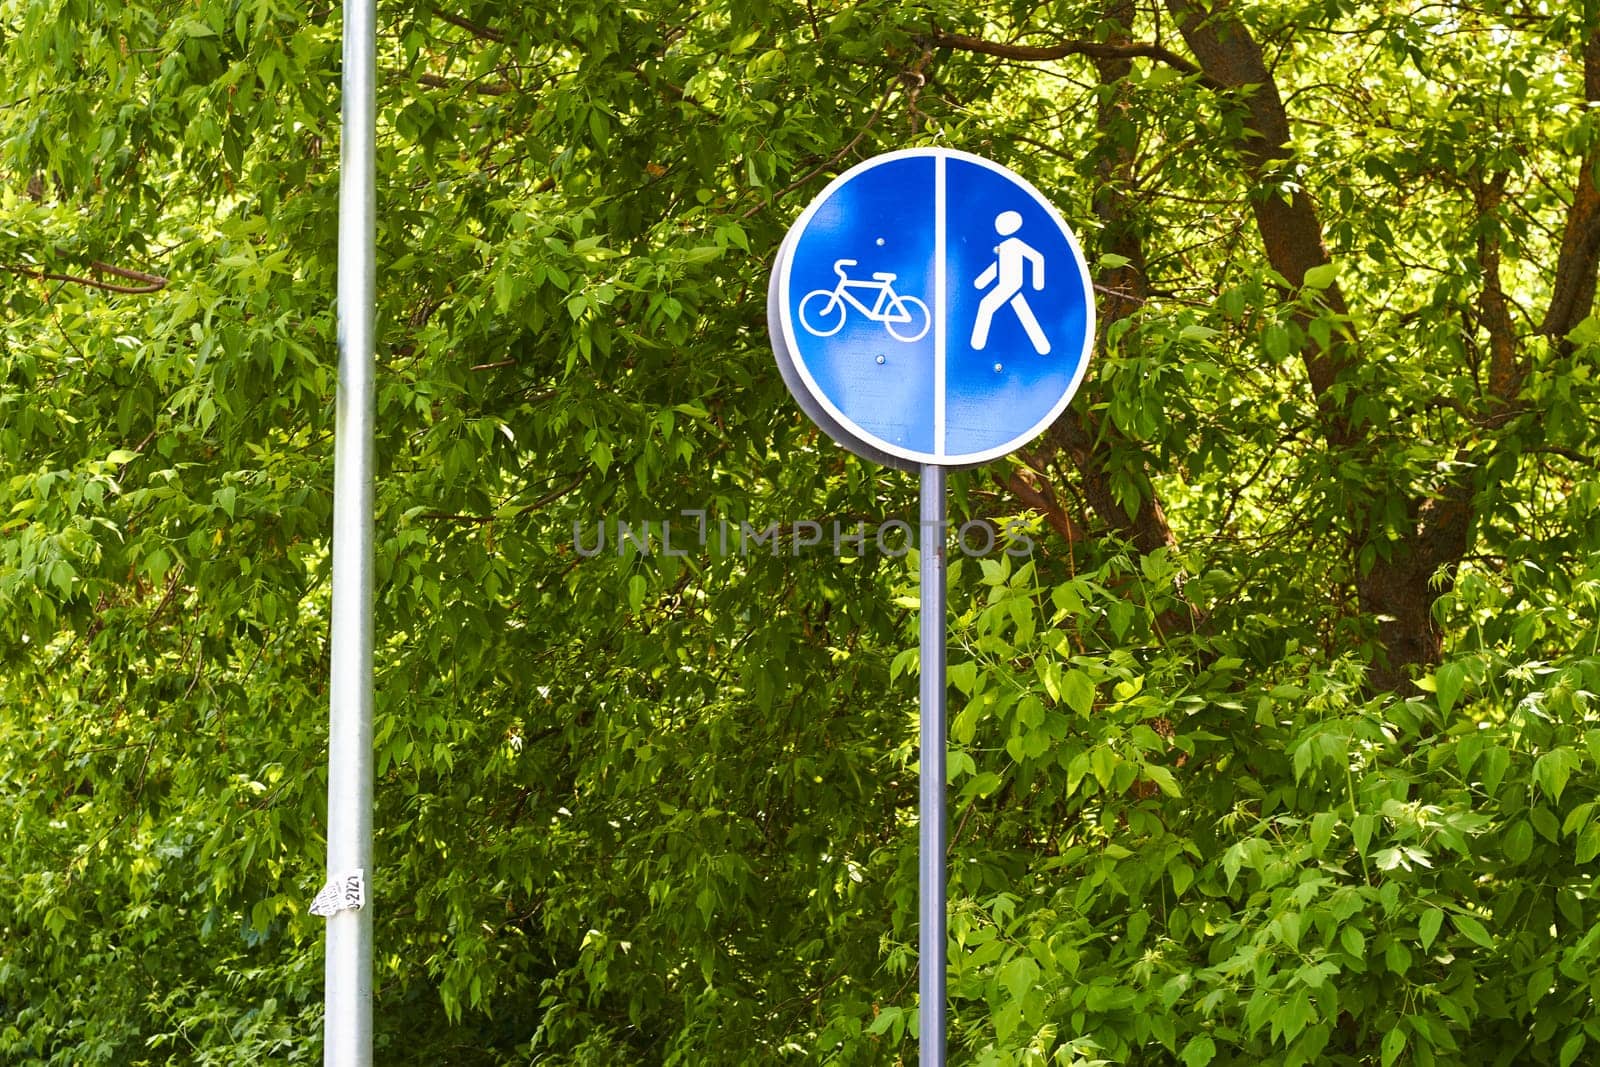 Photograph of round blue pedestrian and bicycle sign against background of foliage. Road traffic and road markings. Rules.